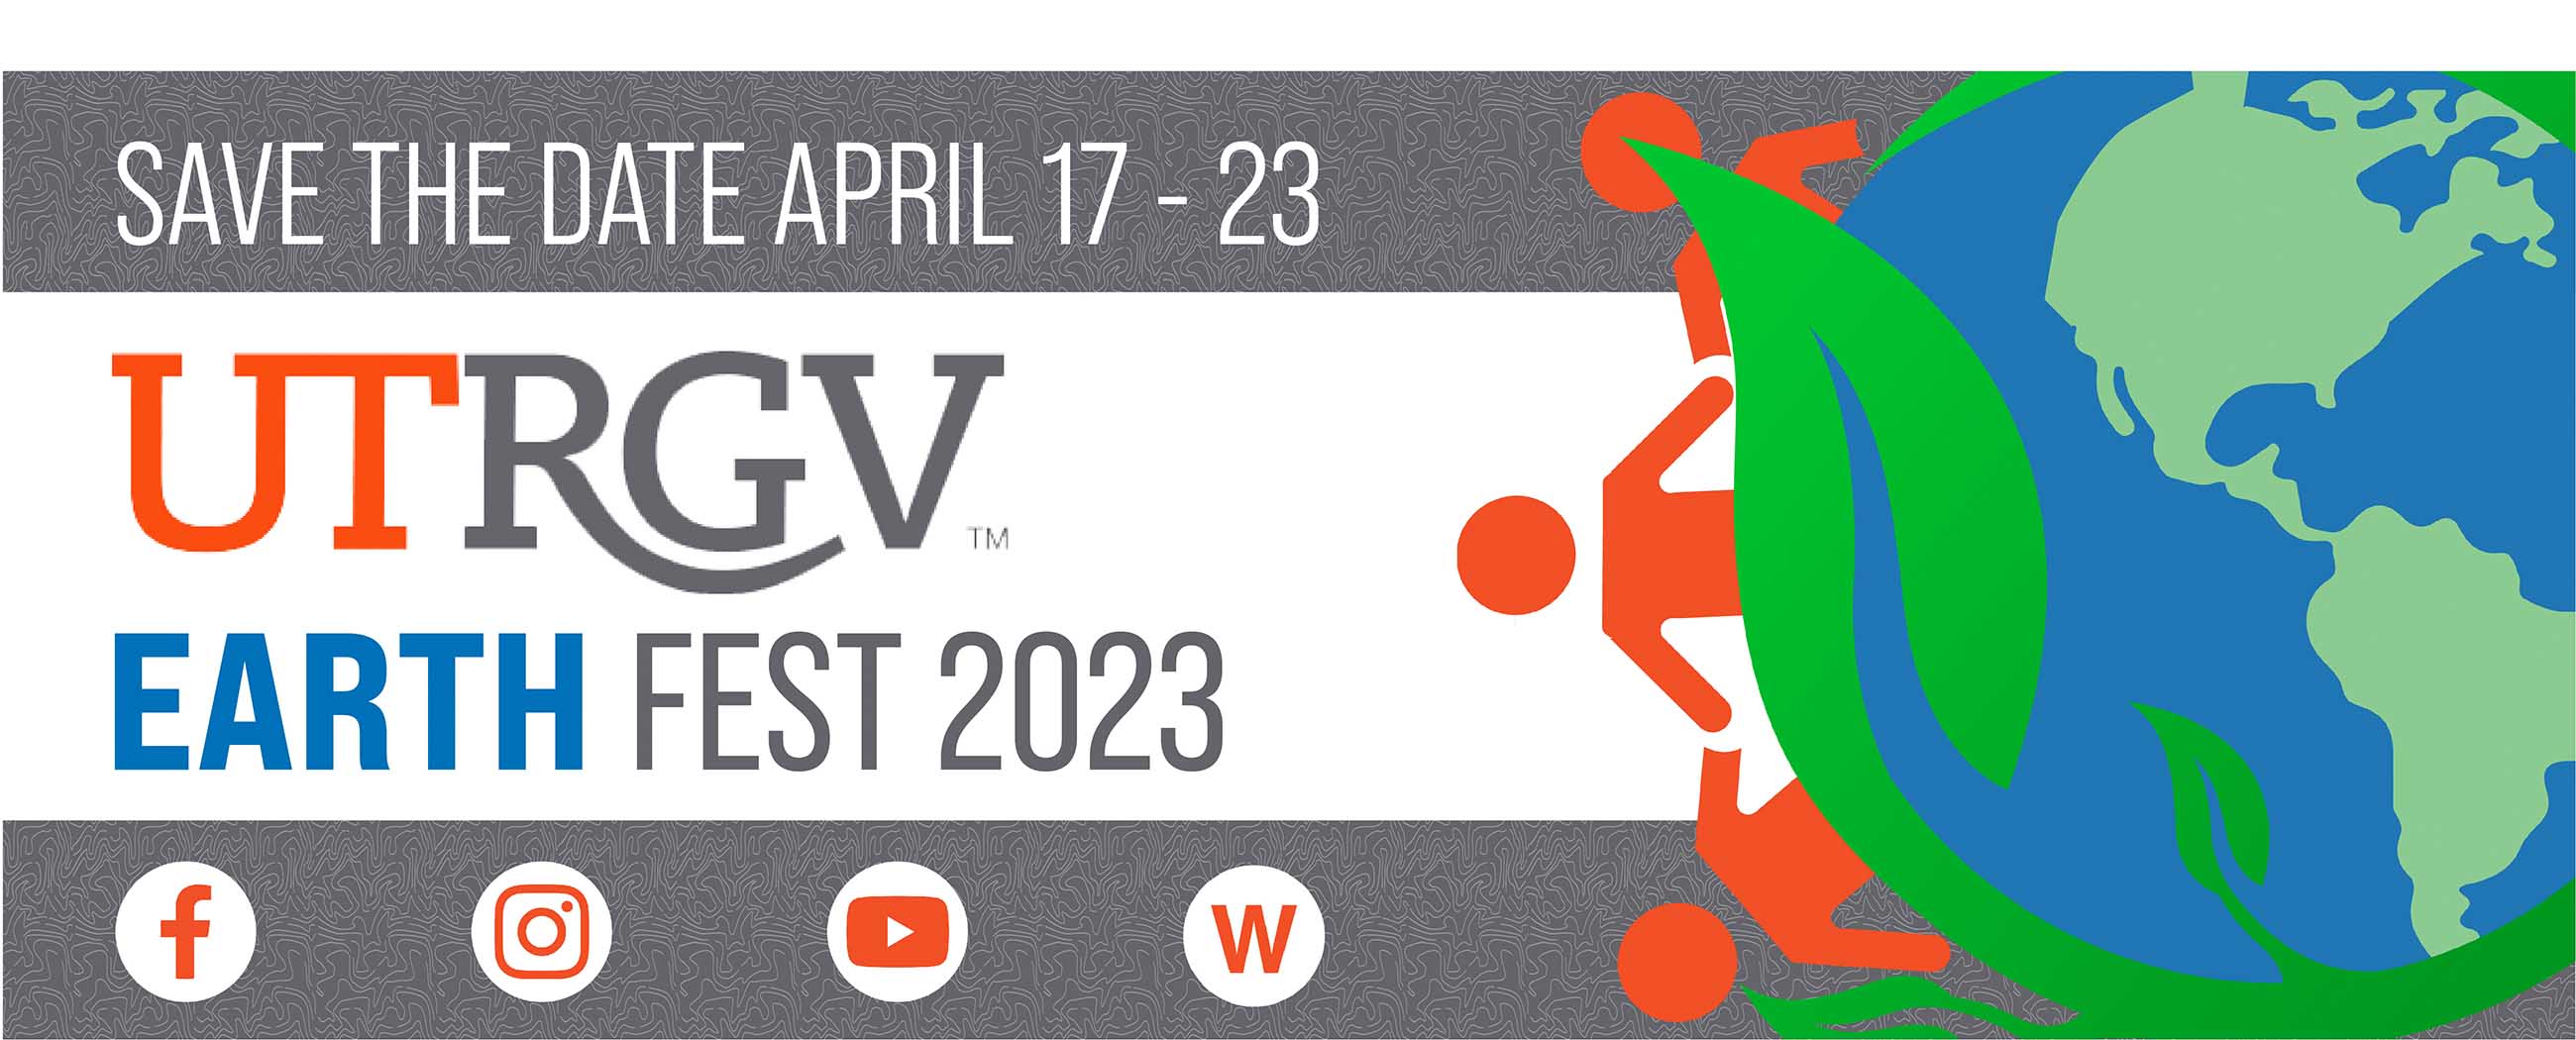 Save the date April 17-23. UTRGV Earth Fest 2023 Page Banner 